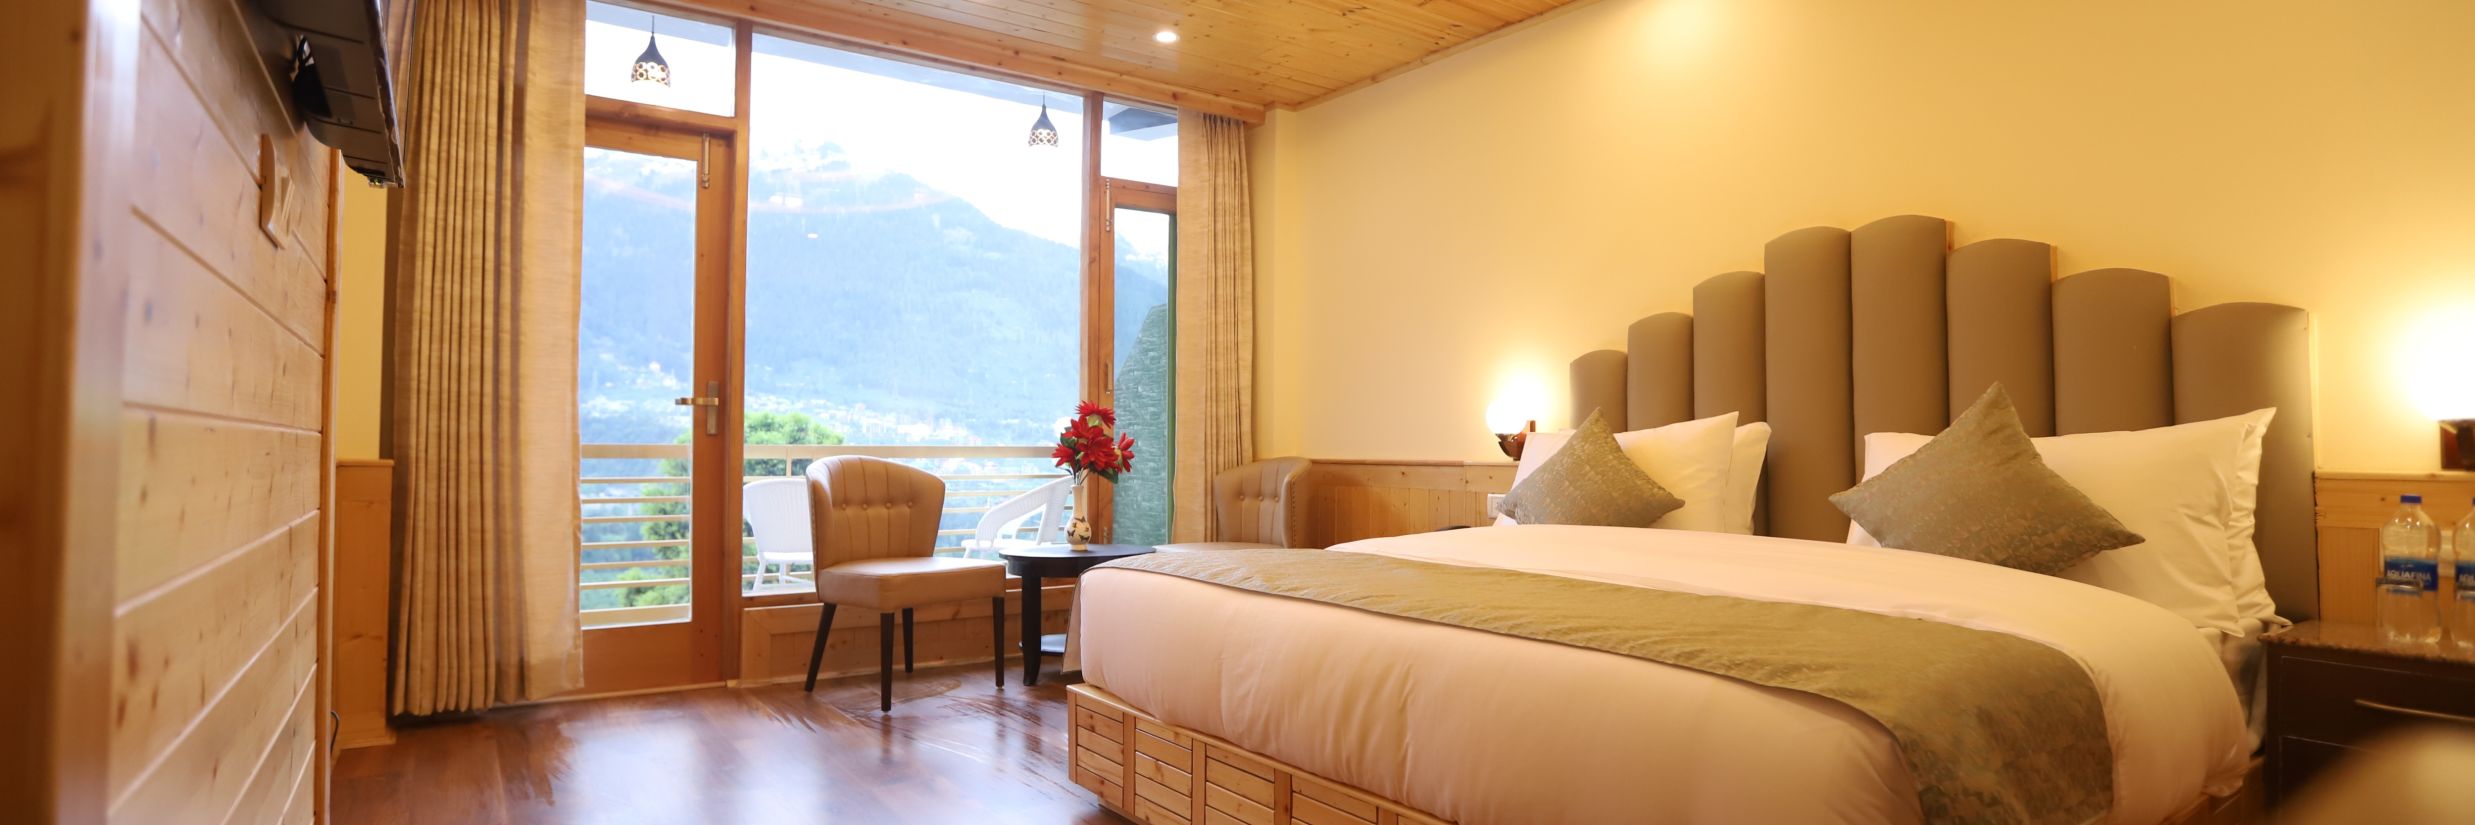 side angle view of premium room that shows the wide open balcony and the panoramic view outside - Golden Wood Manali By Rosetum